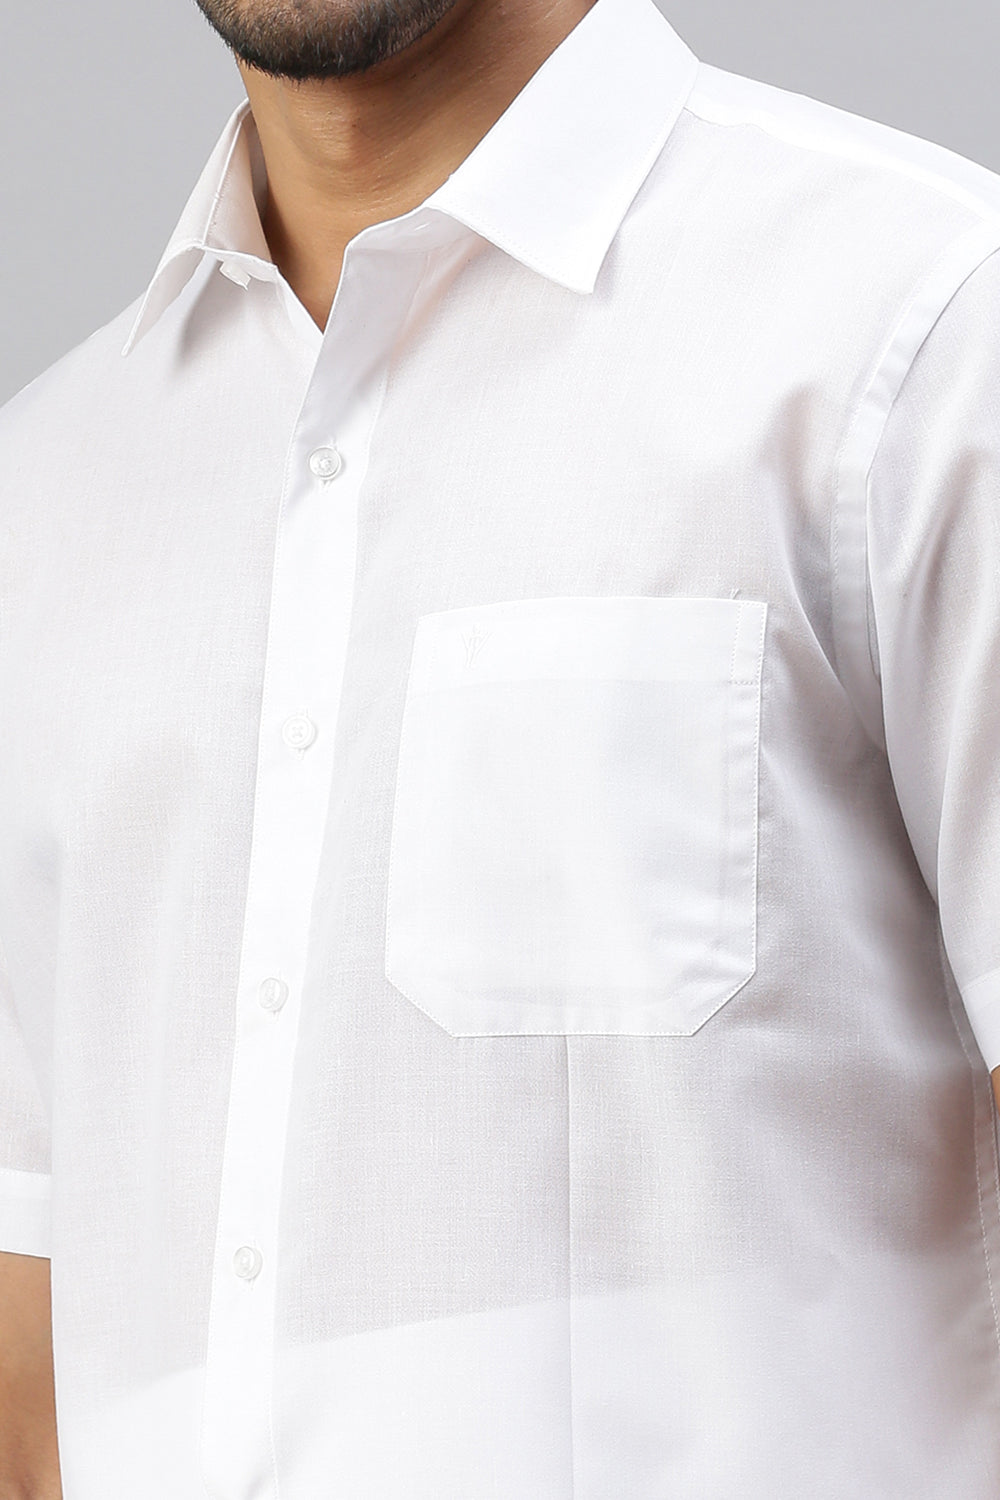 Mens Cotton White Shirt Half Sleeves Viceroy-Zoom view